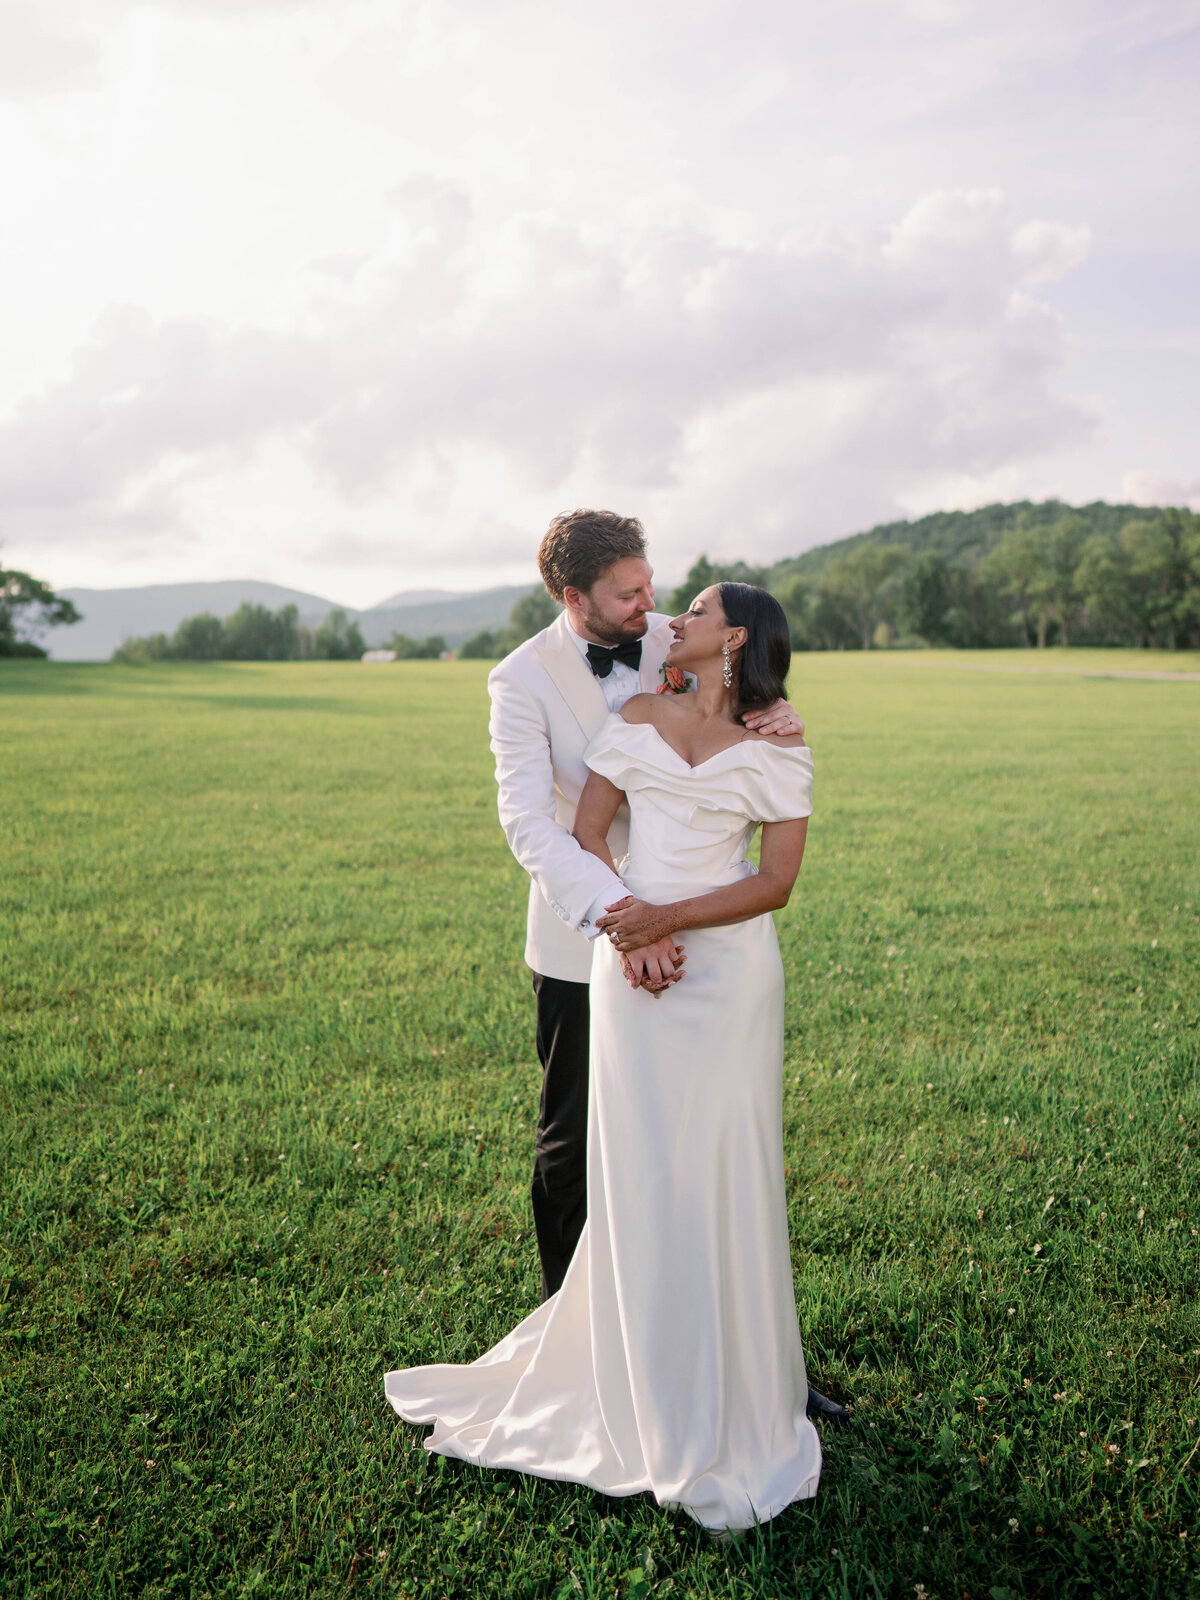 Liz Andolina Photography Destination Wedding Photographer in Italy, New York, Across the East Coast Editorial, heritage-quality images for stylish couples-777